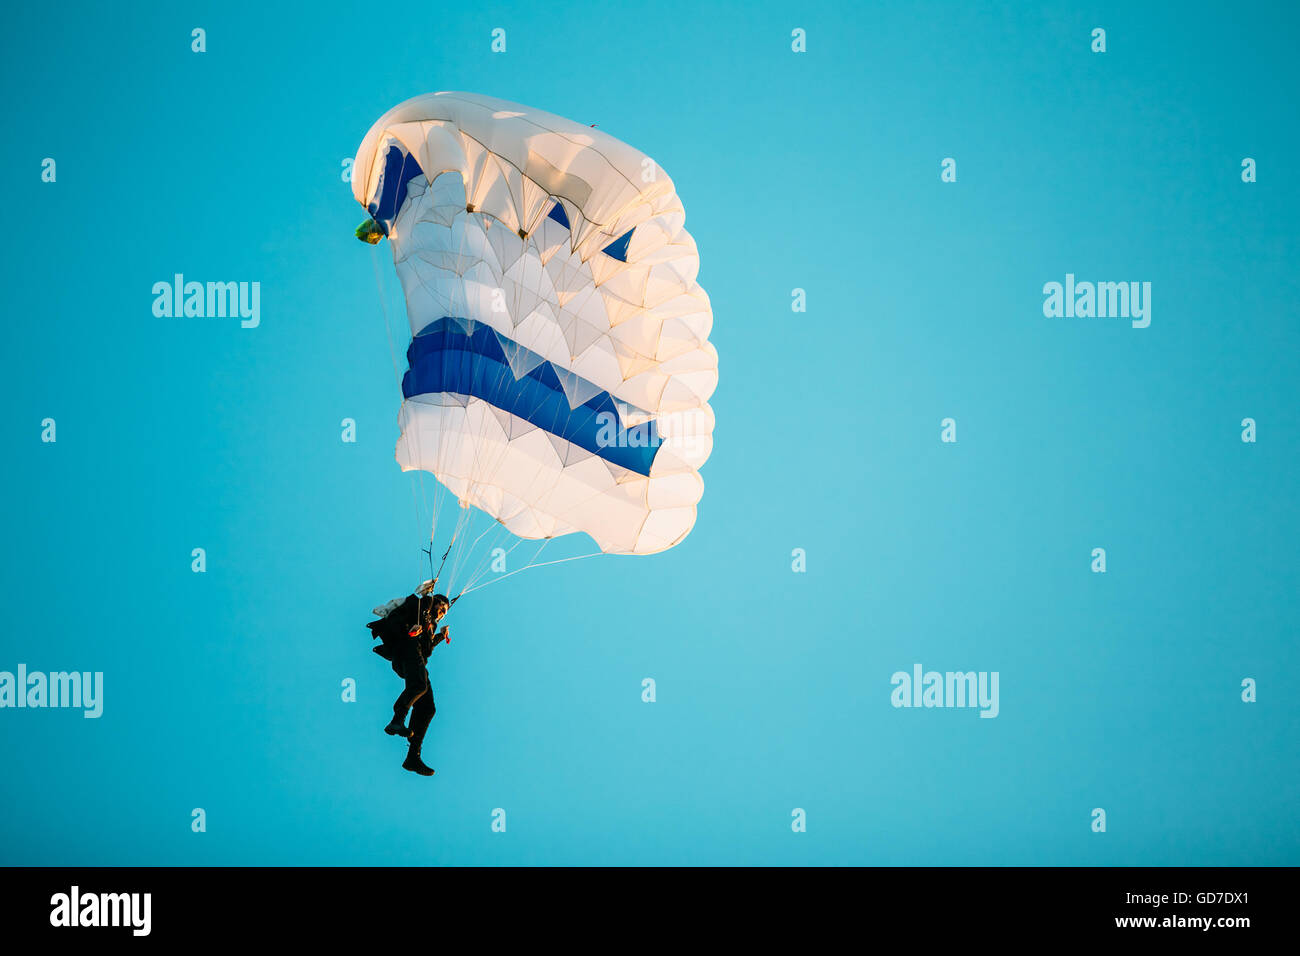 Skydiver On Colorful Parachute In Sunny Clear Sky. Active Hobbies Stock Photo